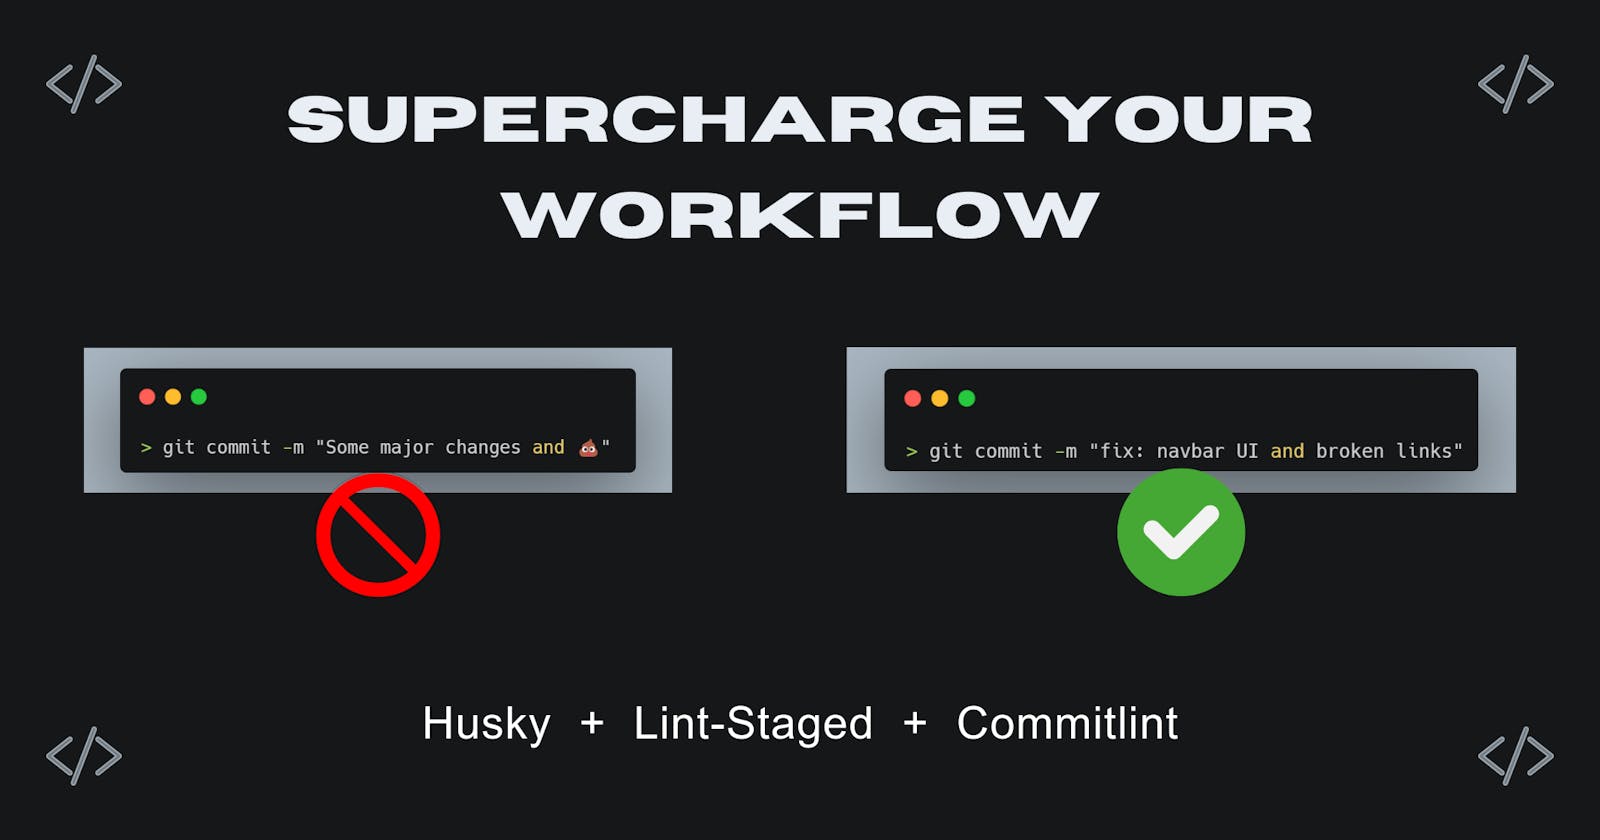 Supercharge your workflow with Husky, Lint Staged and Commitlint